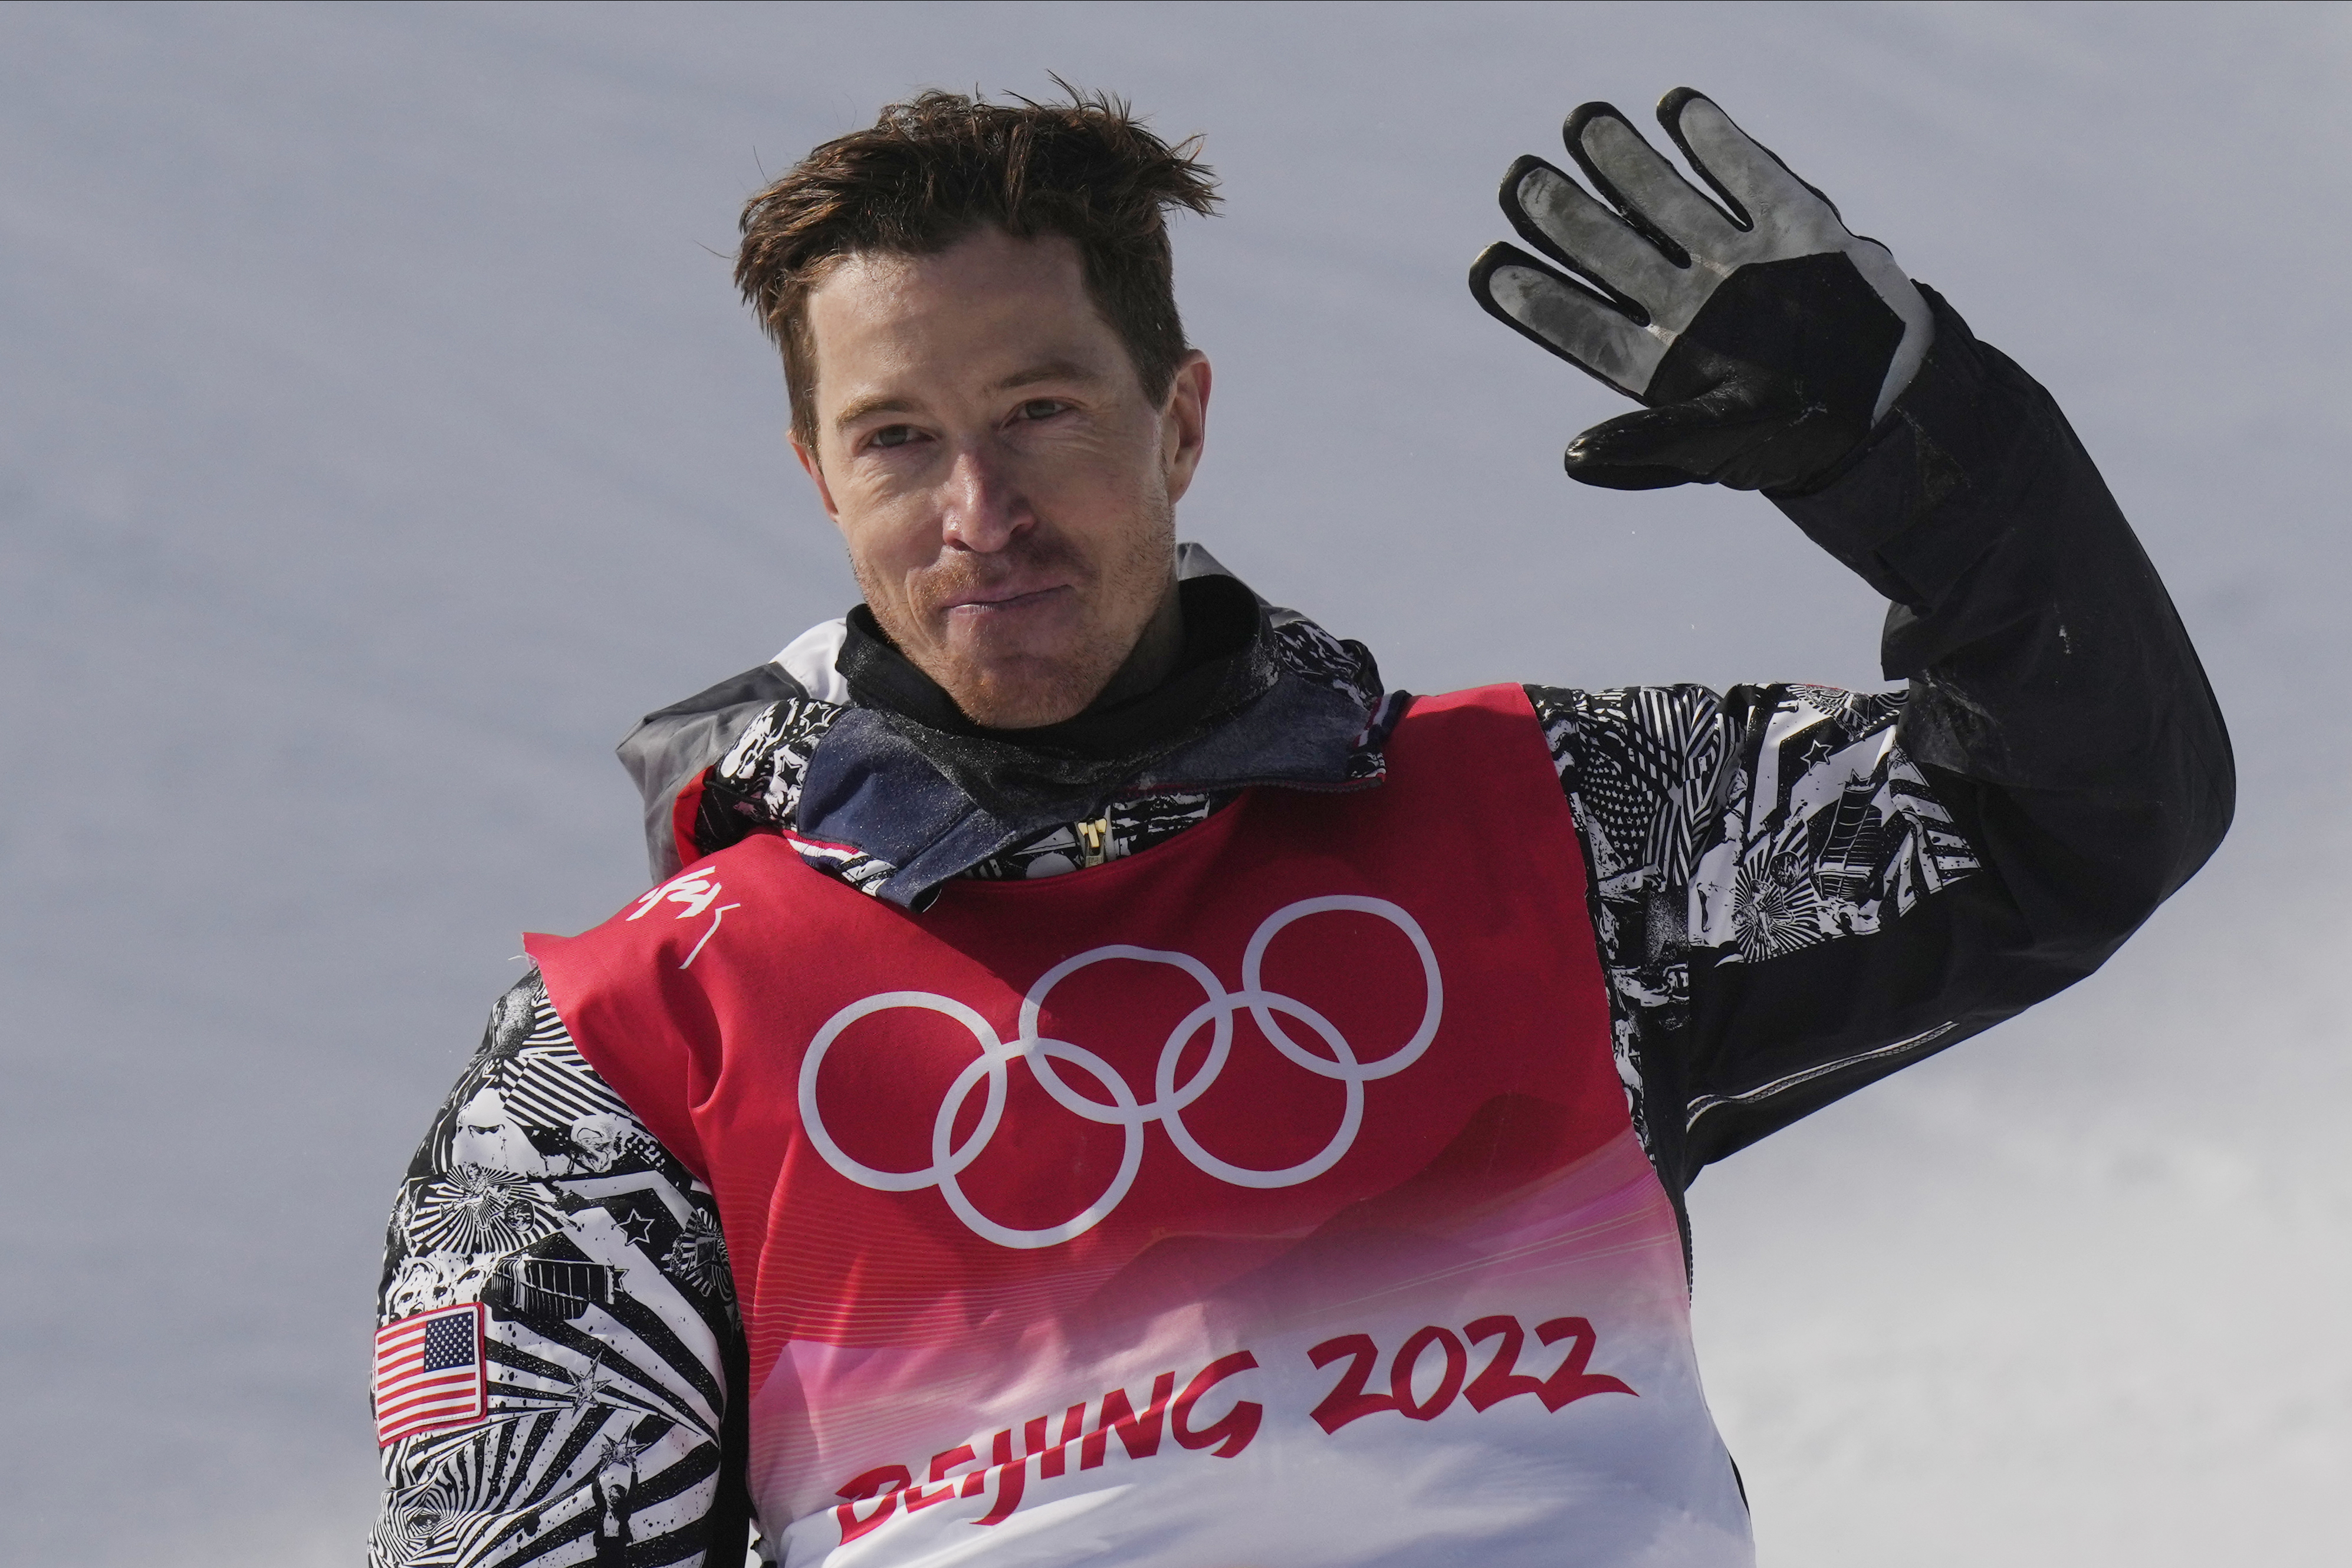 Shaun White, legendary snowboarder and Olympic gold medalist